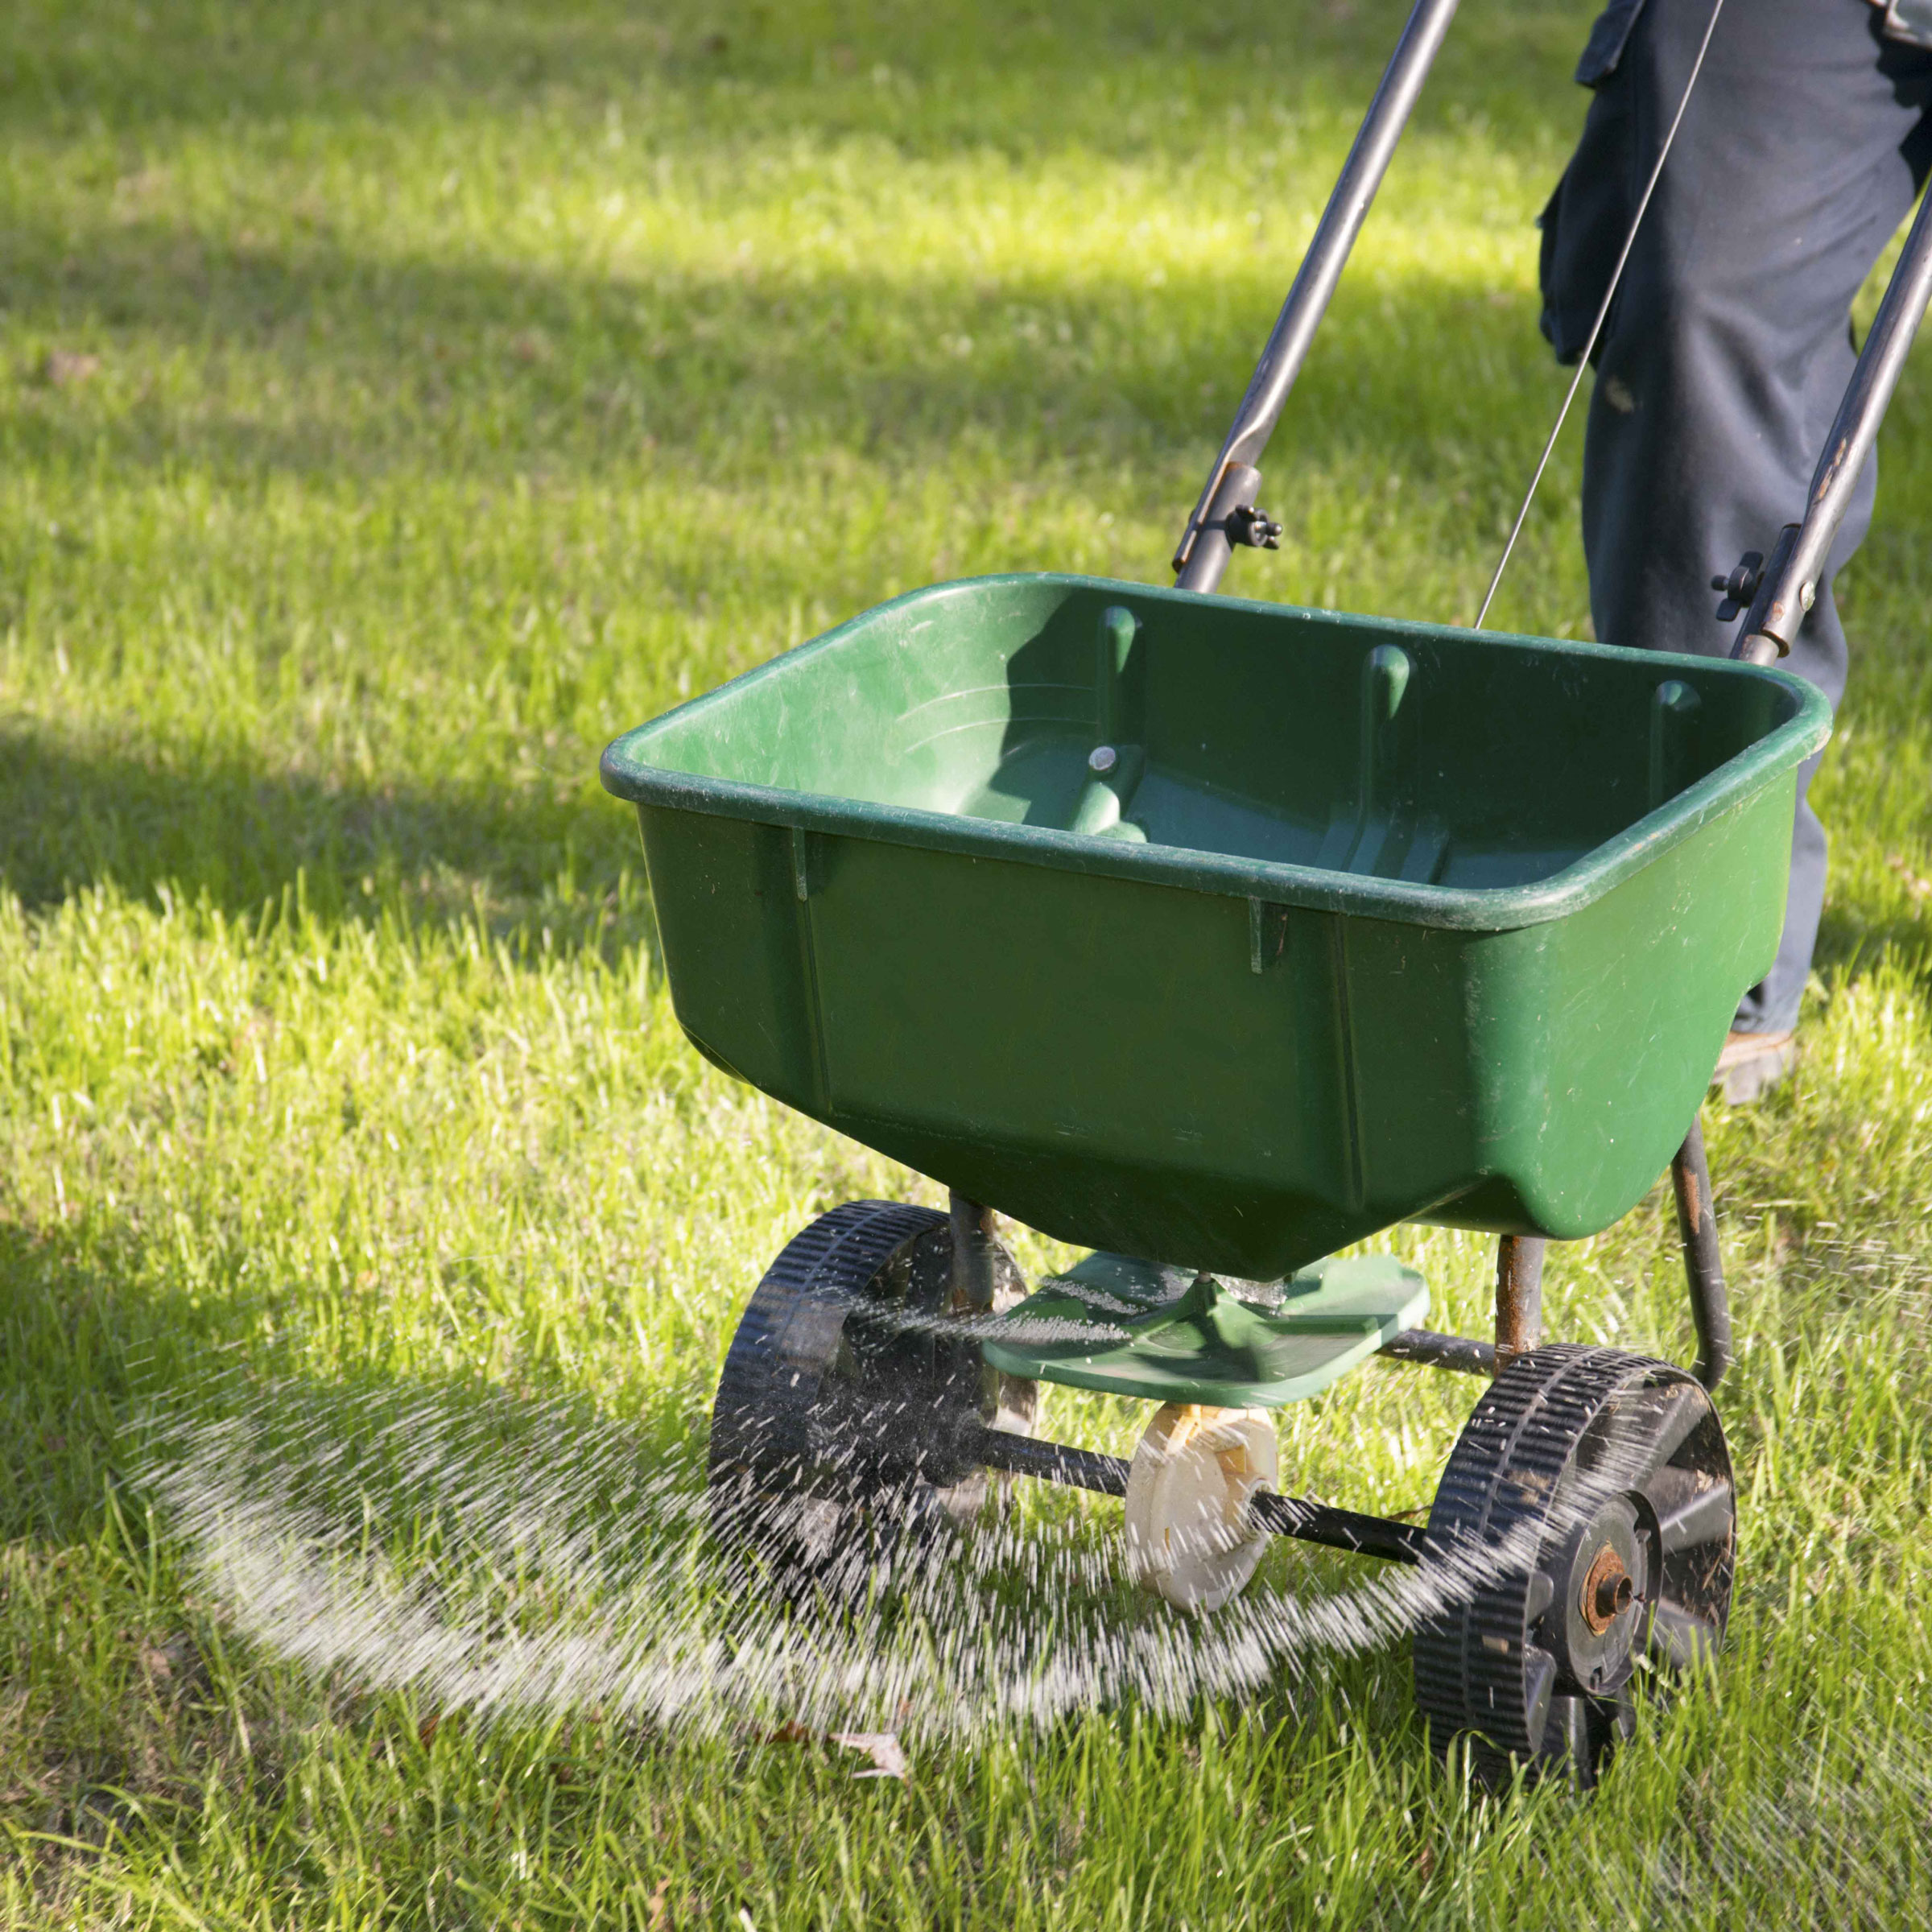 Early Spring Lawn Care - Neil Sperry's Notes